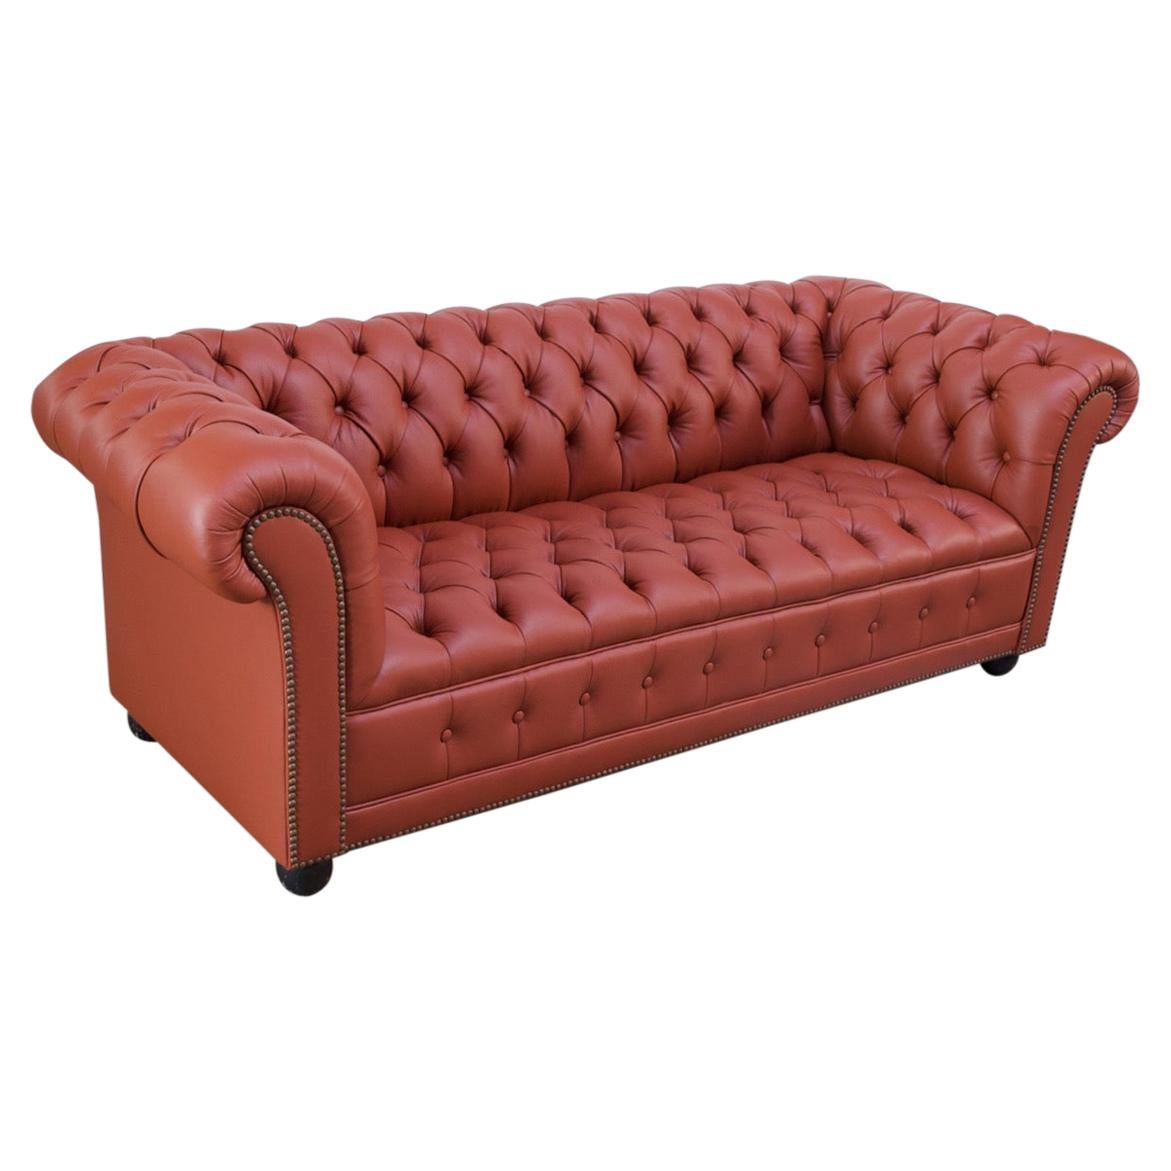 Vintage Restored English Leather Chesterfield Sofa